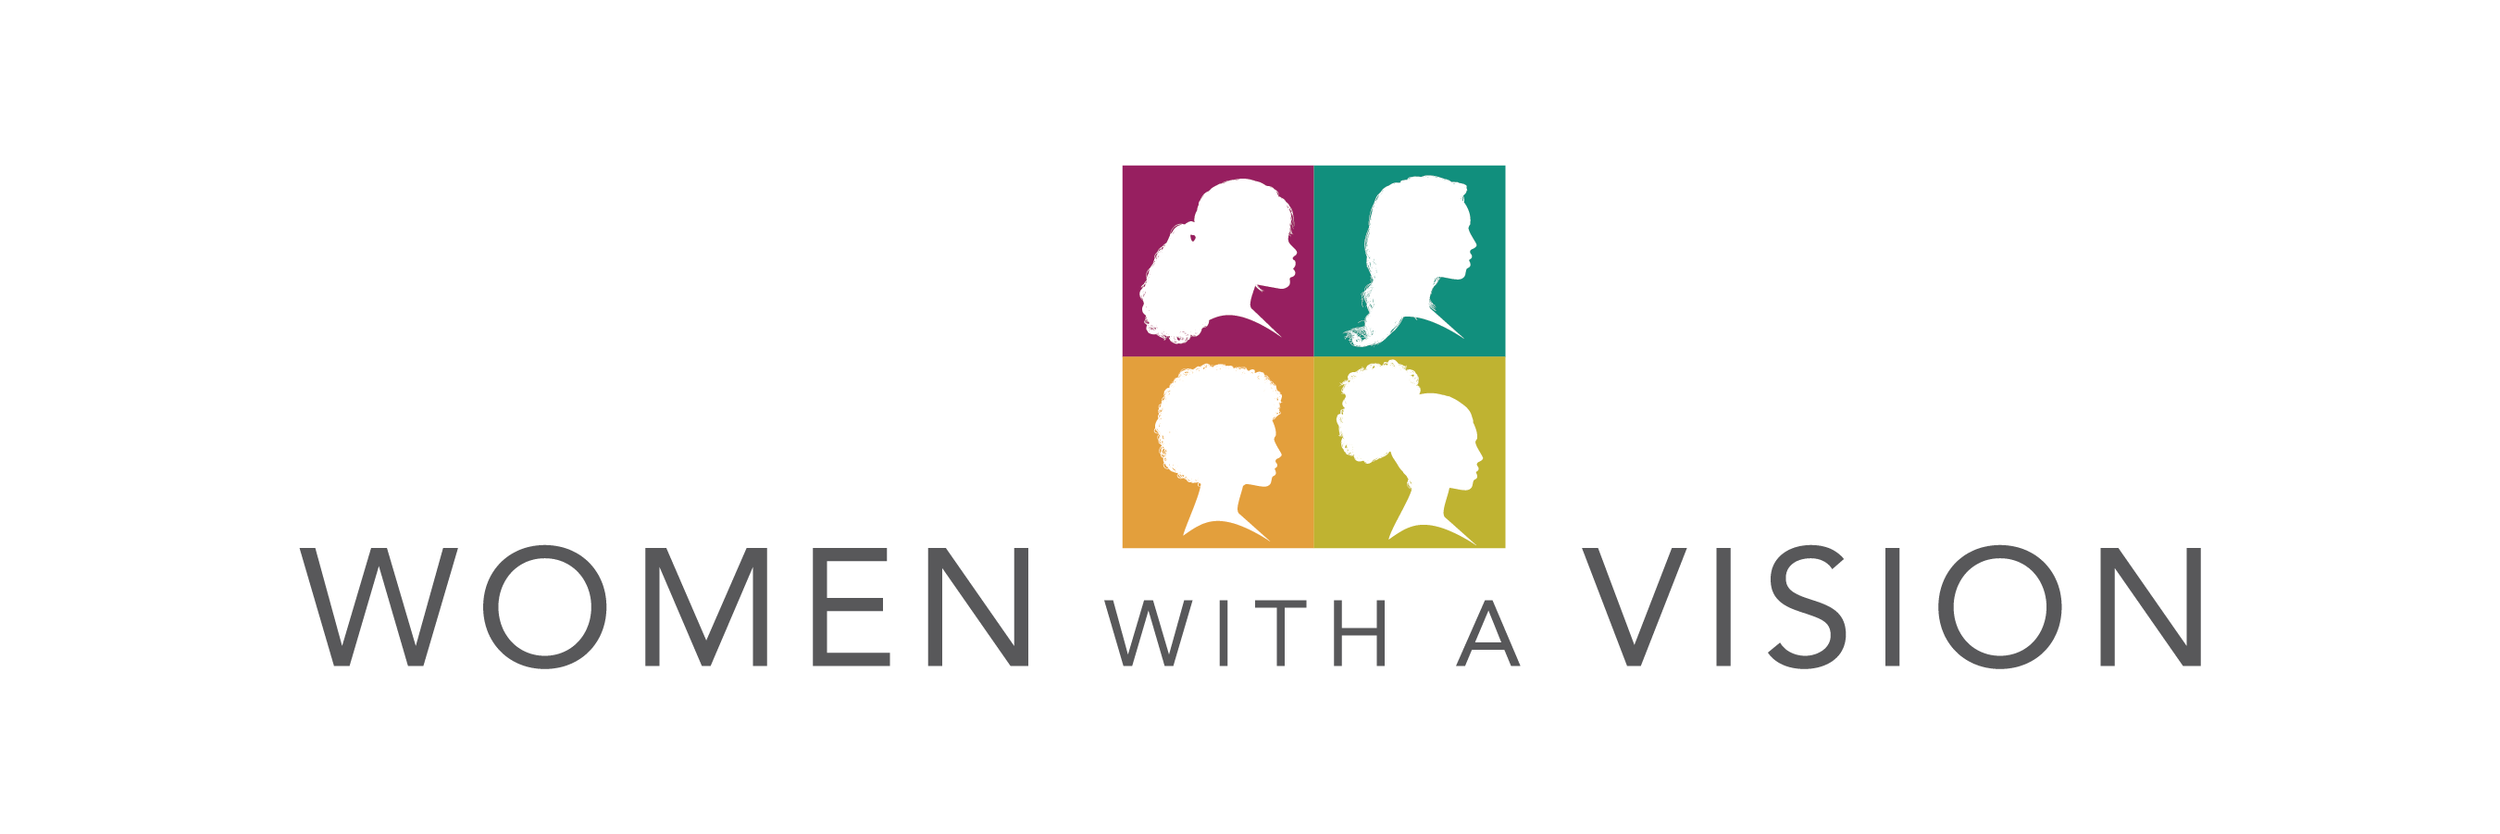 Women With a Vision Foundation - LA